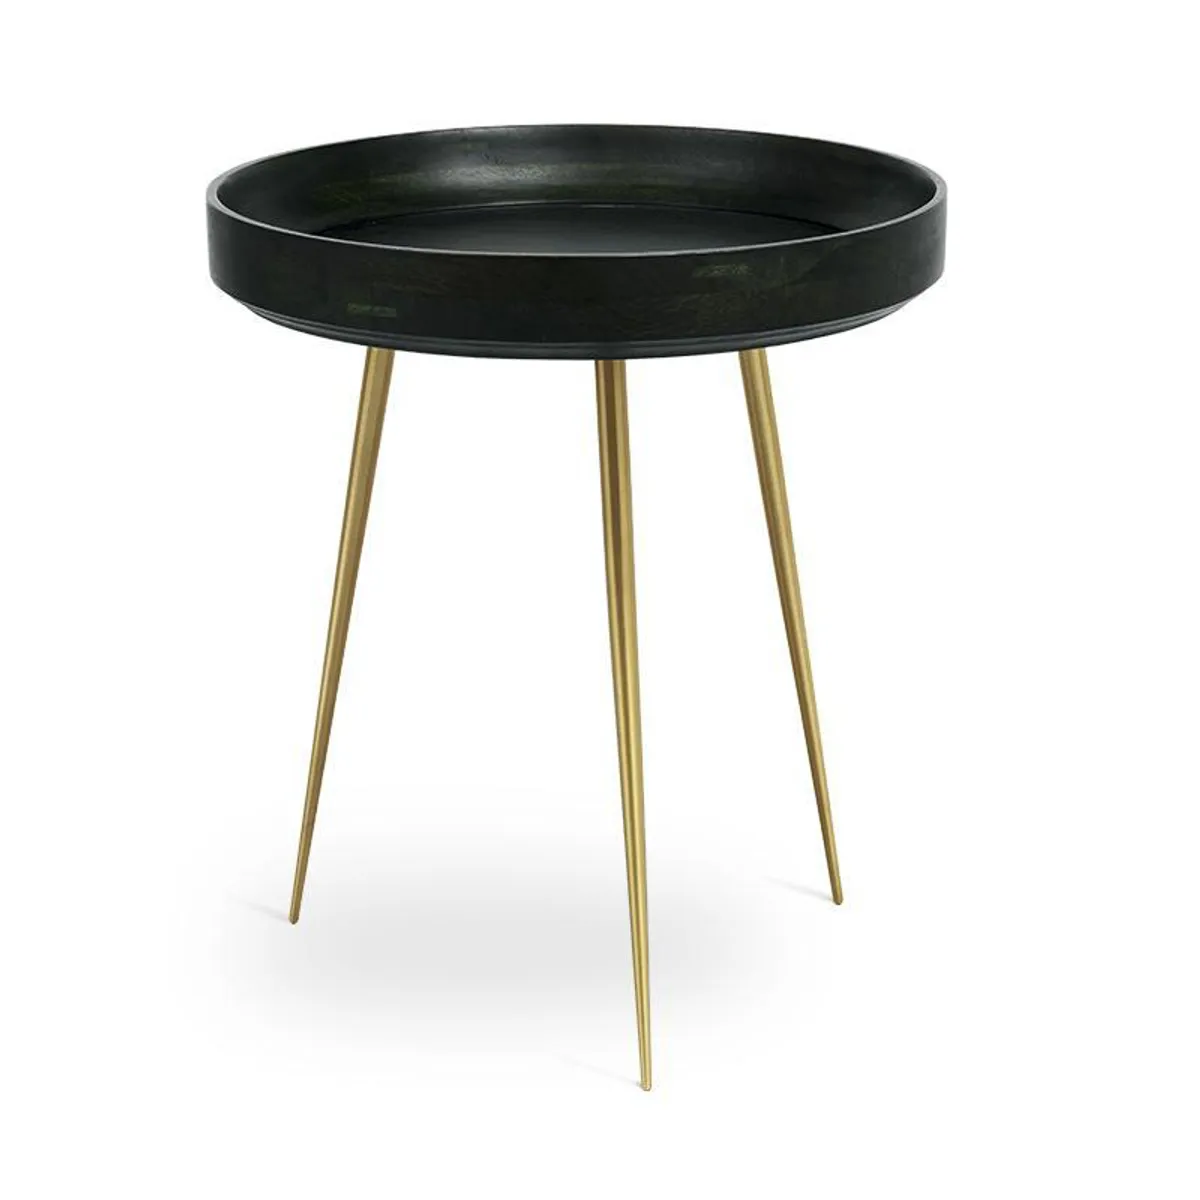 Bowl Table Brass And Green Contract Suitable Side Table For Cafe Hotel And Healthcare By Inside Out Contracts